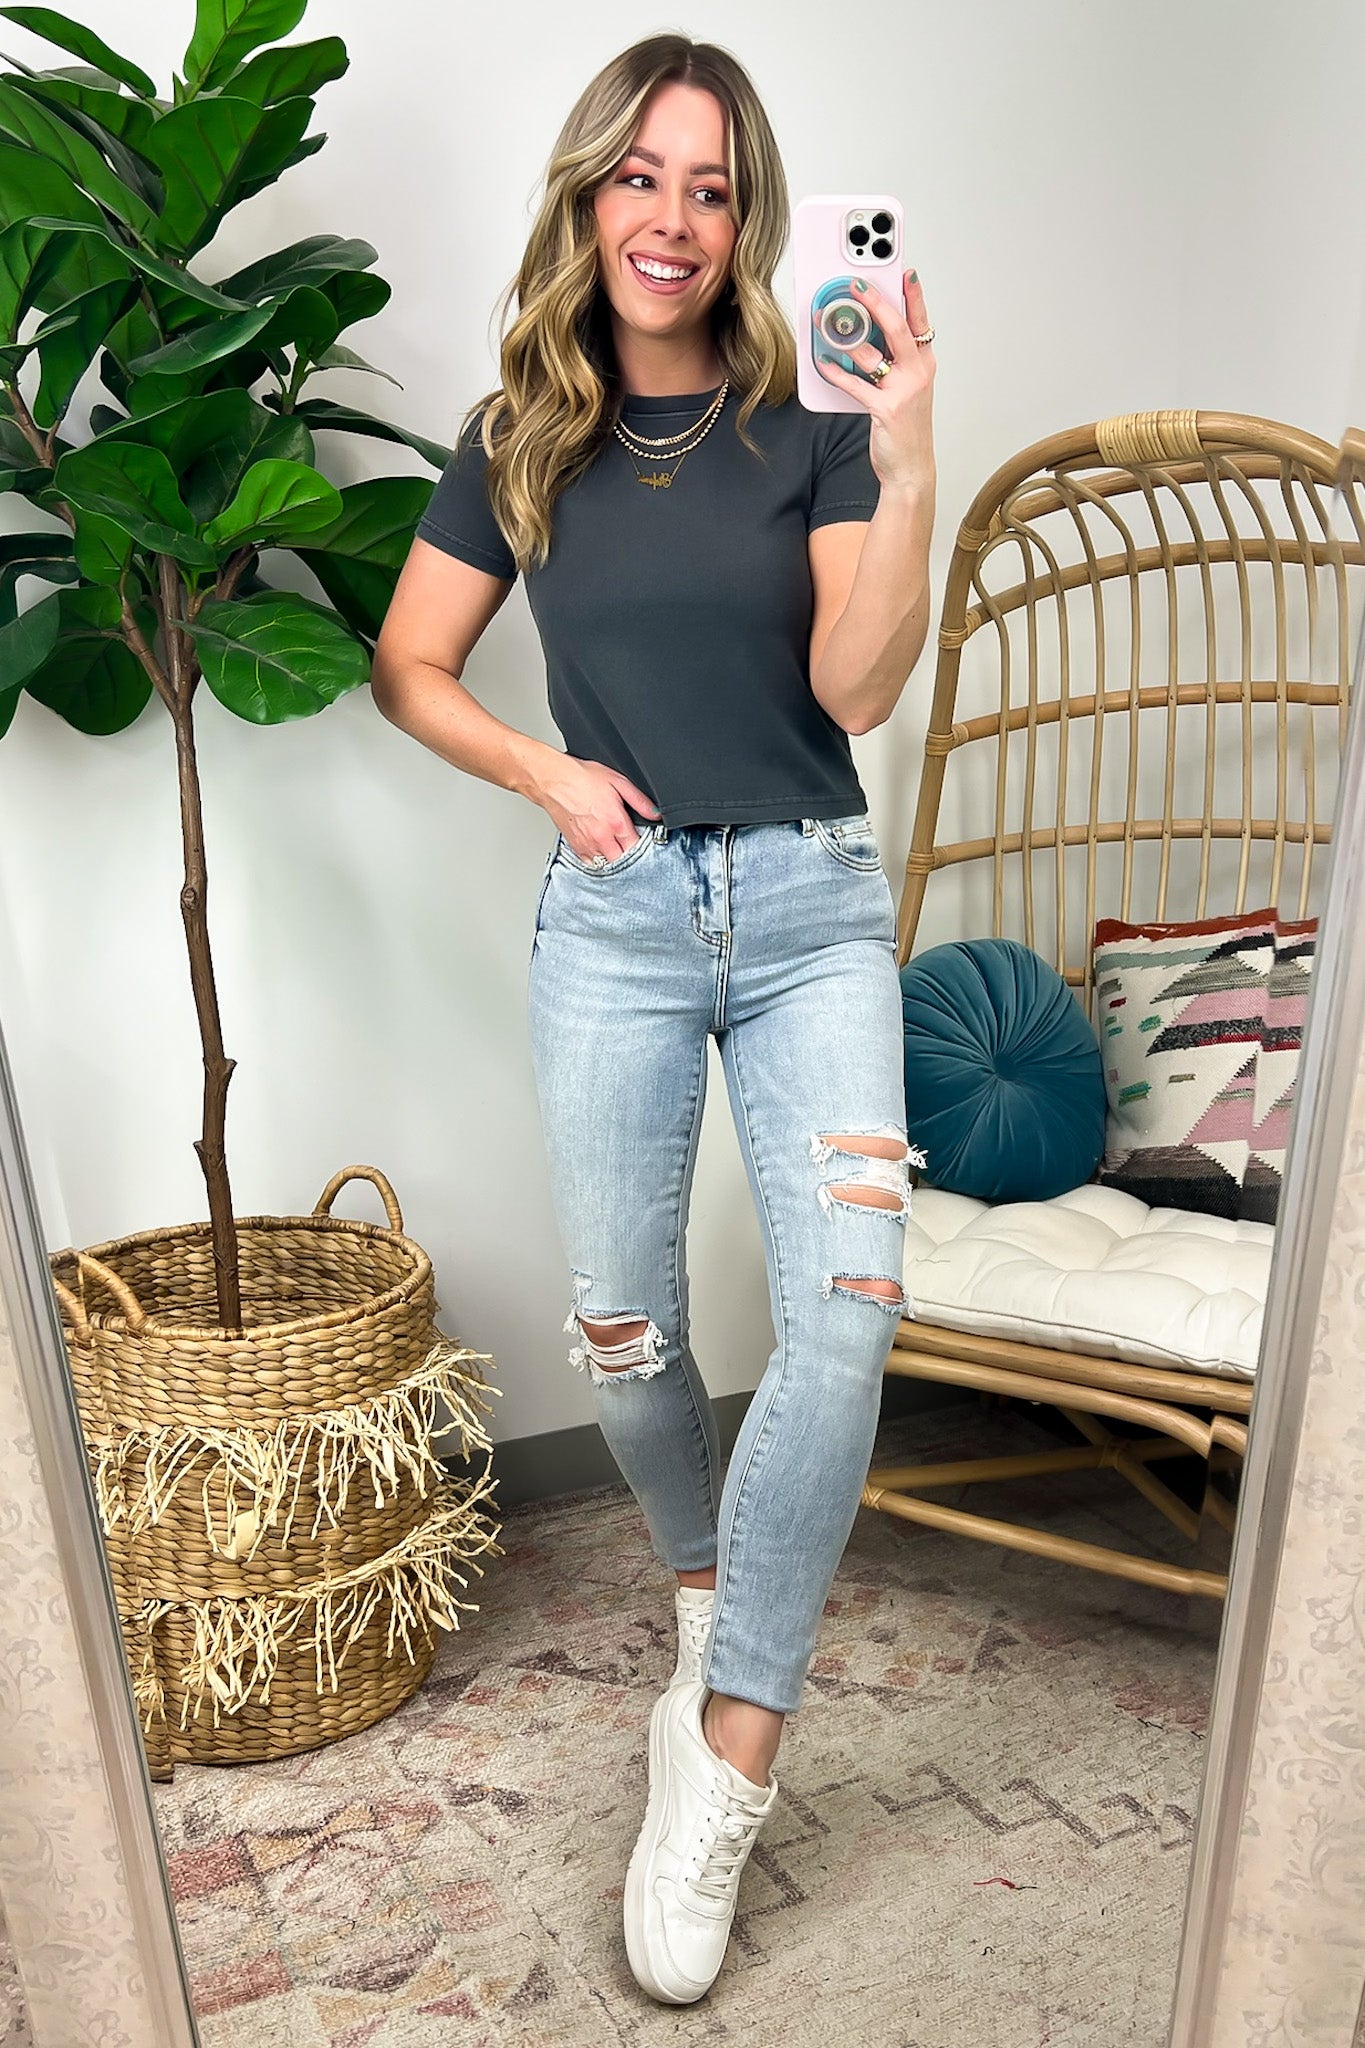  Tarsen Short Sleeve Cropped Tee - FINAL SALE - Madison and Mallory